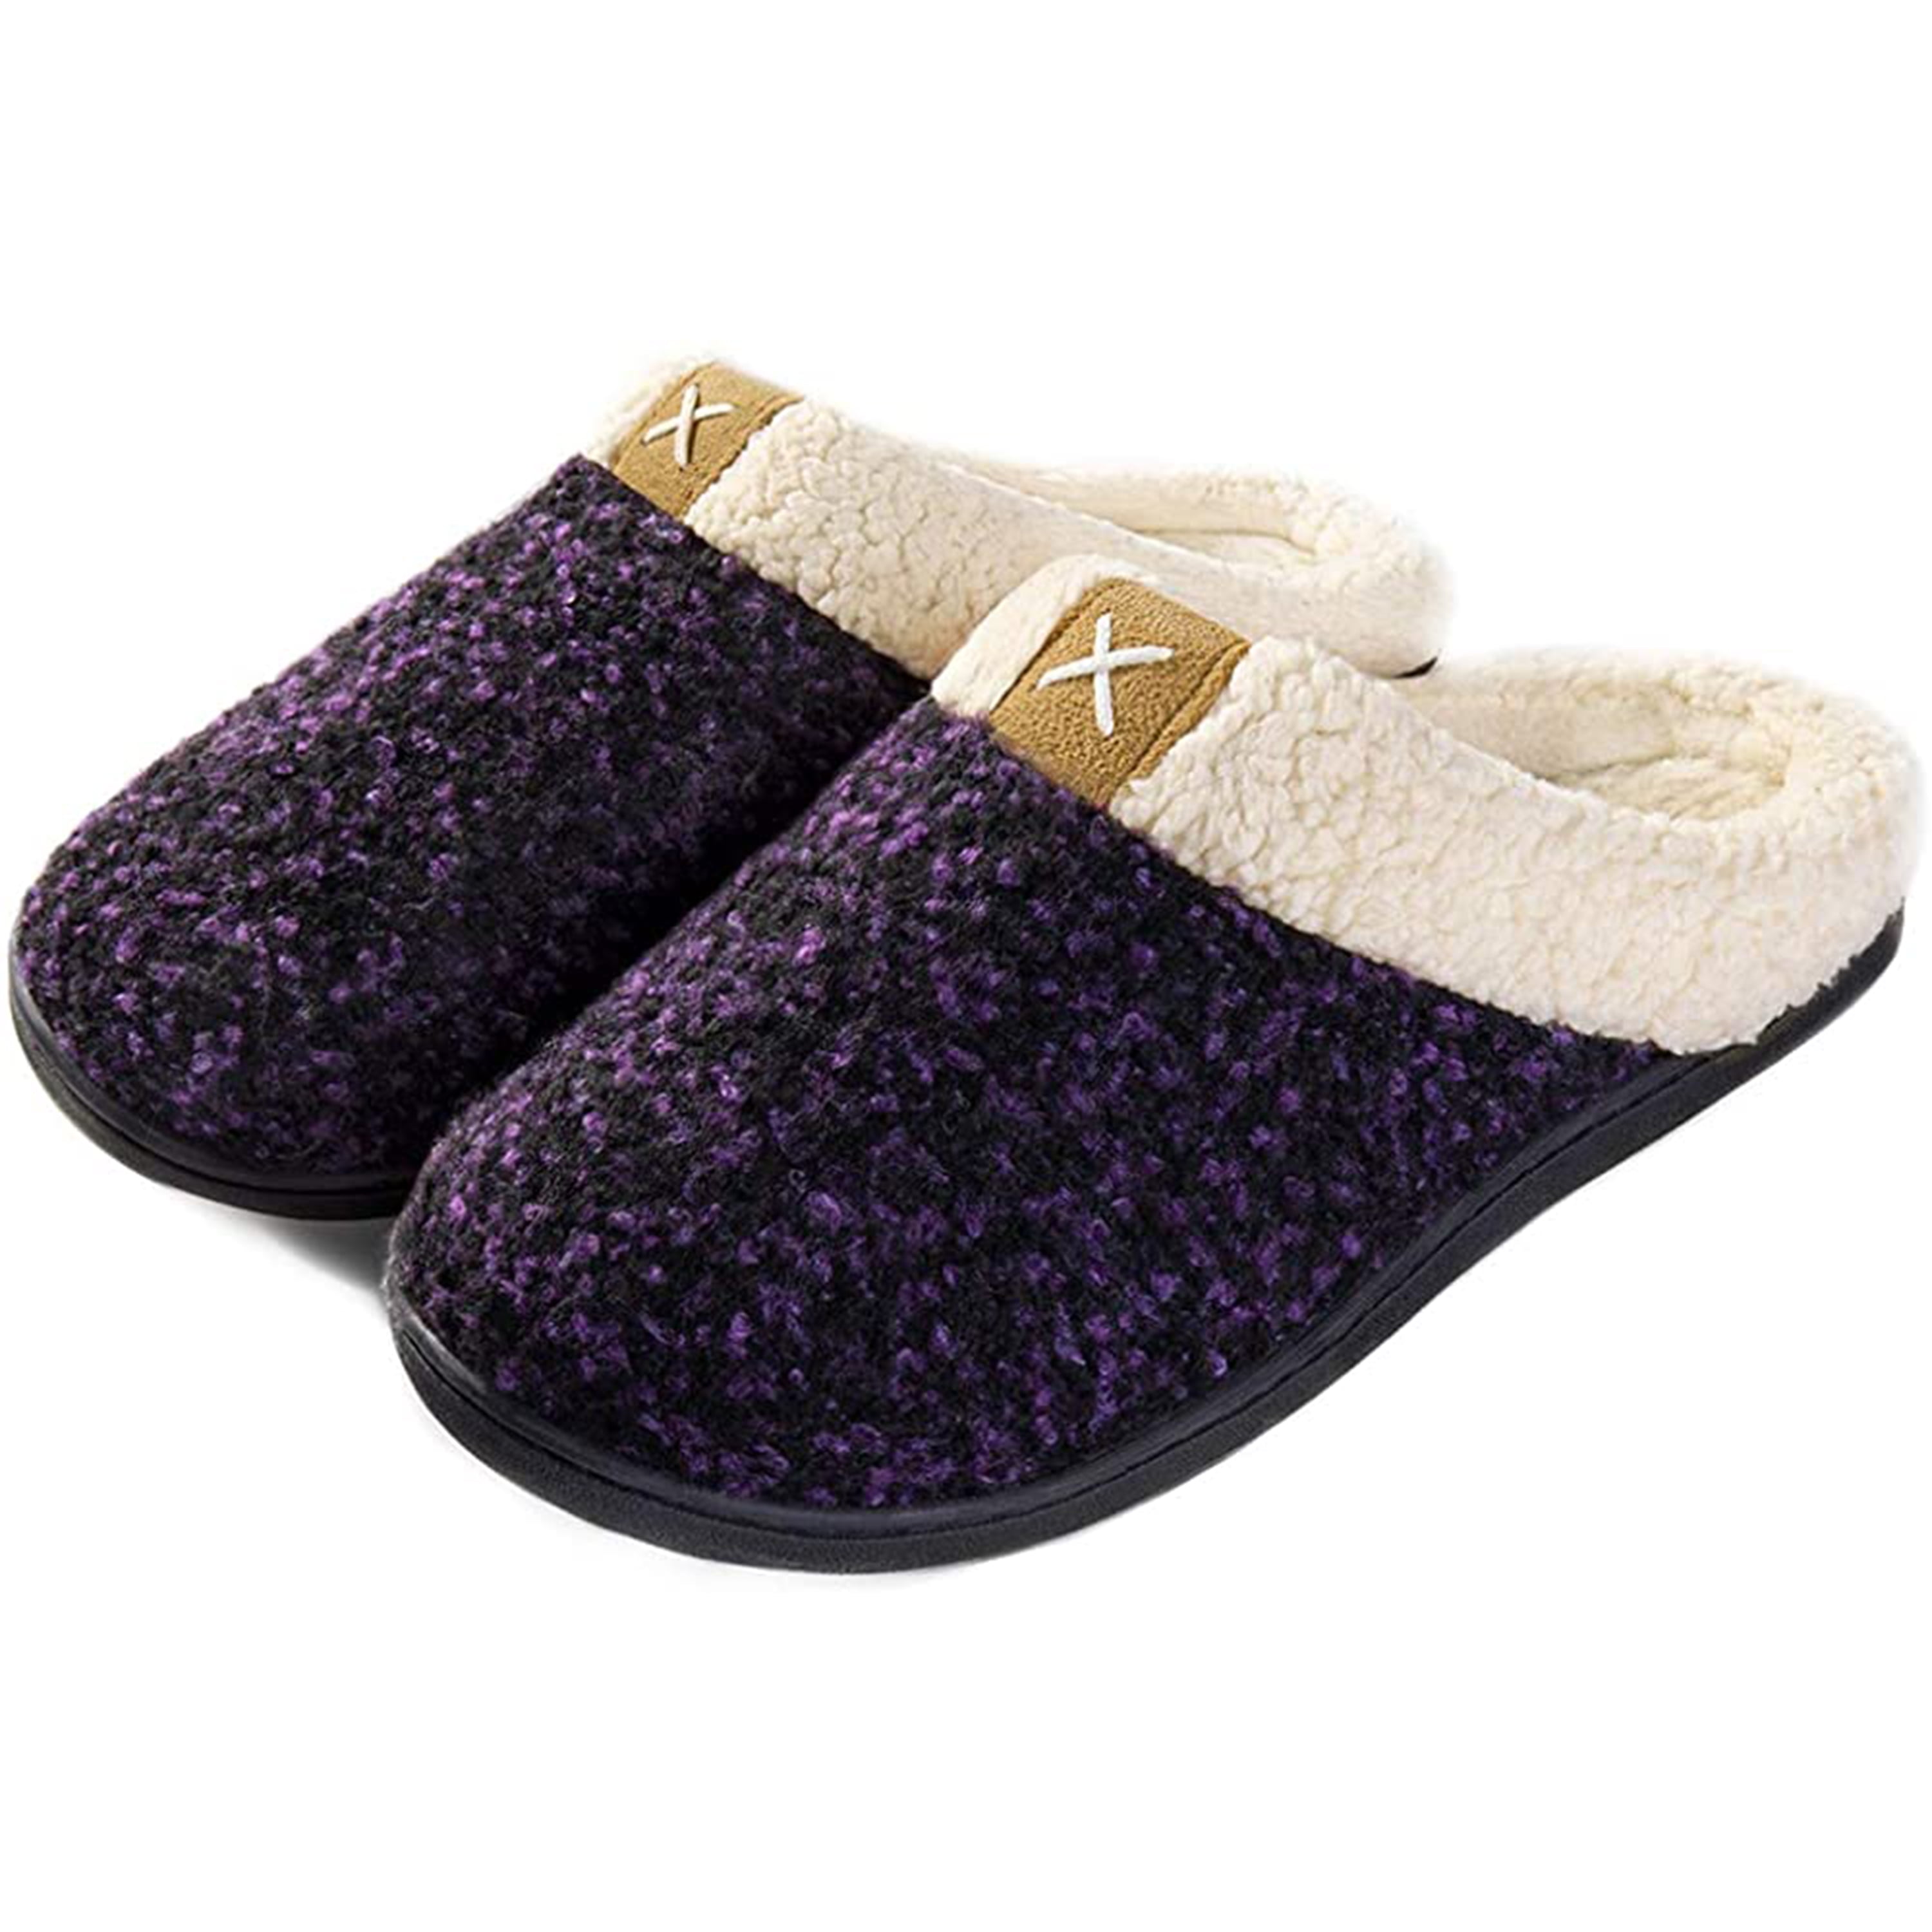 Epsion Womens Winter Warm Slipper Faux Fur Fluffy Slip-On House Slippers Suede Fur Lined/Anti-Skid Sole Indoor Outdoor 